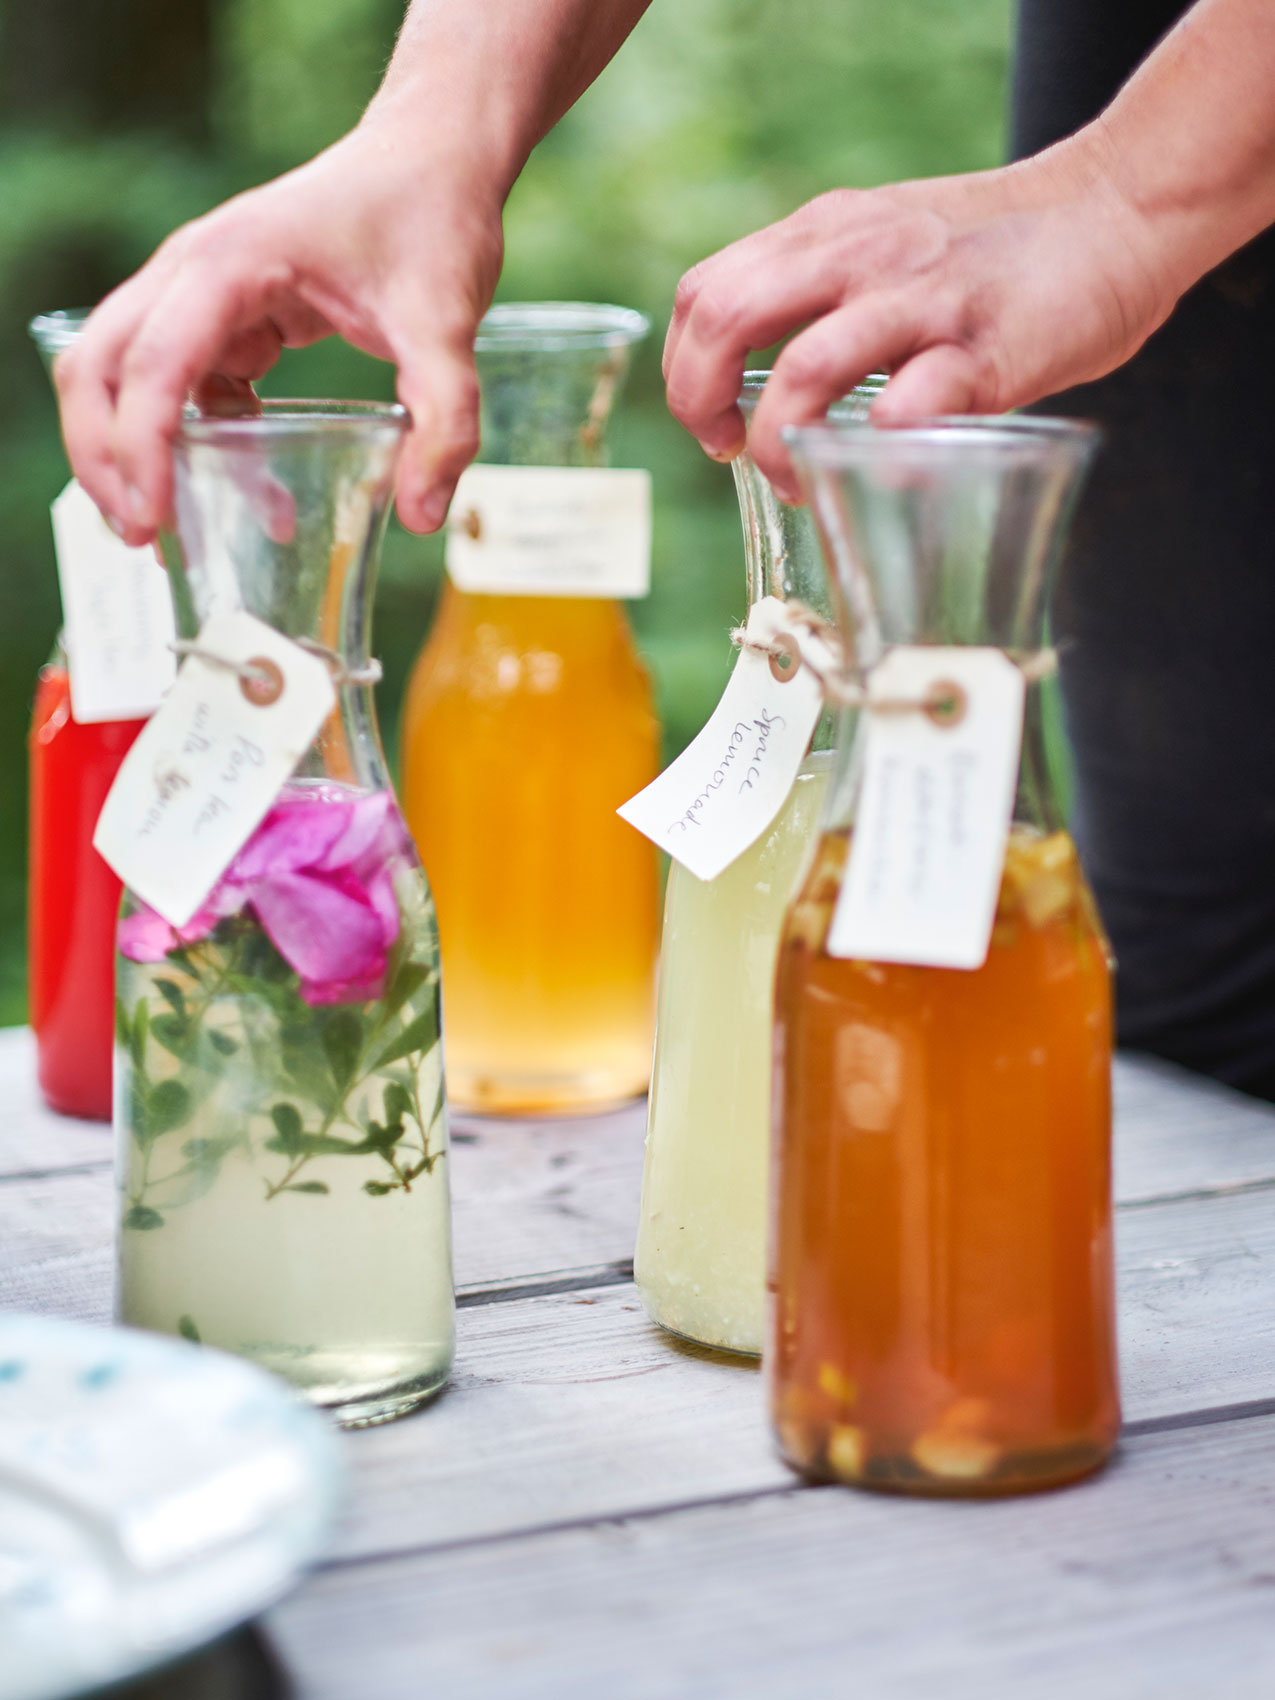 Stedsans in the Woods • Rose Water & Spruce Lemonade in Glass Pitchers • Lifestyle & Editorial Food Photography